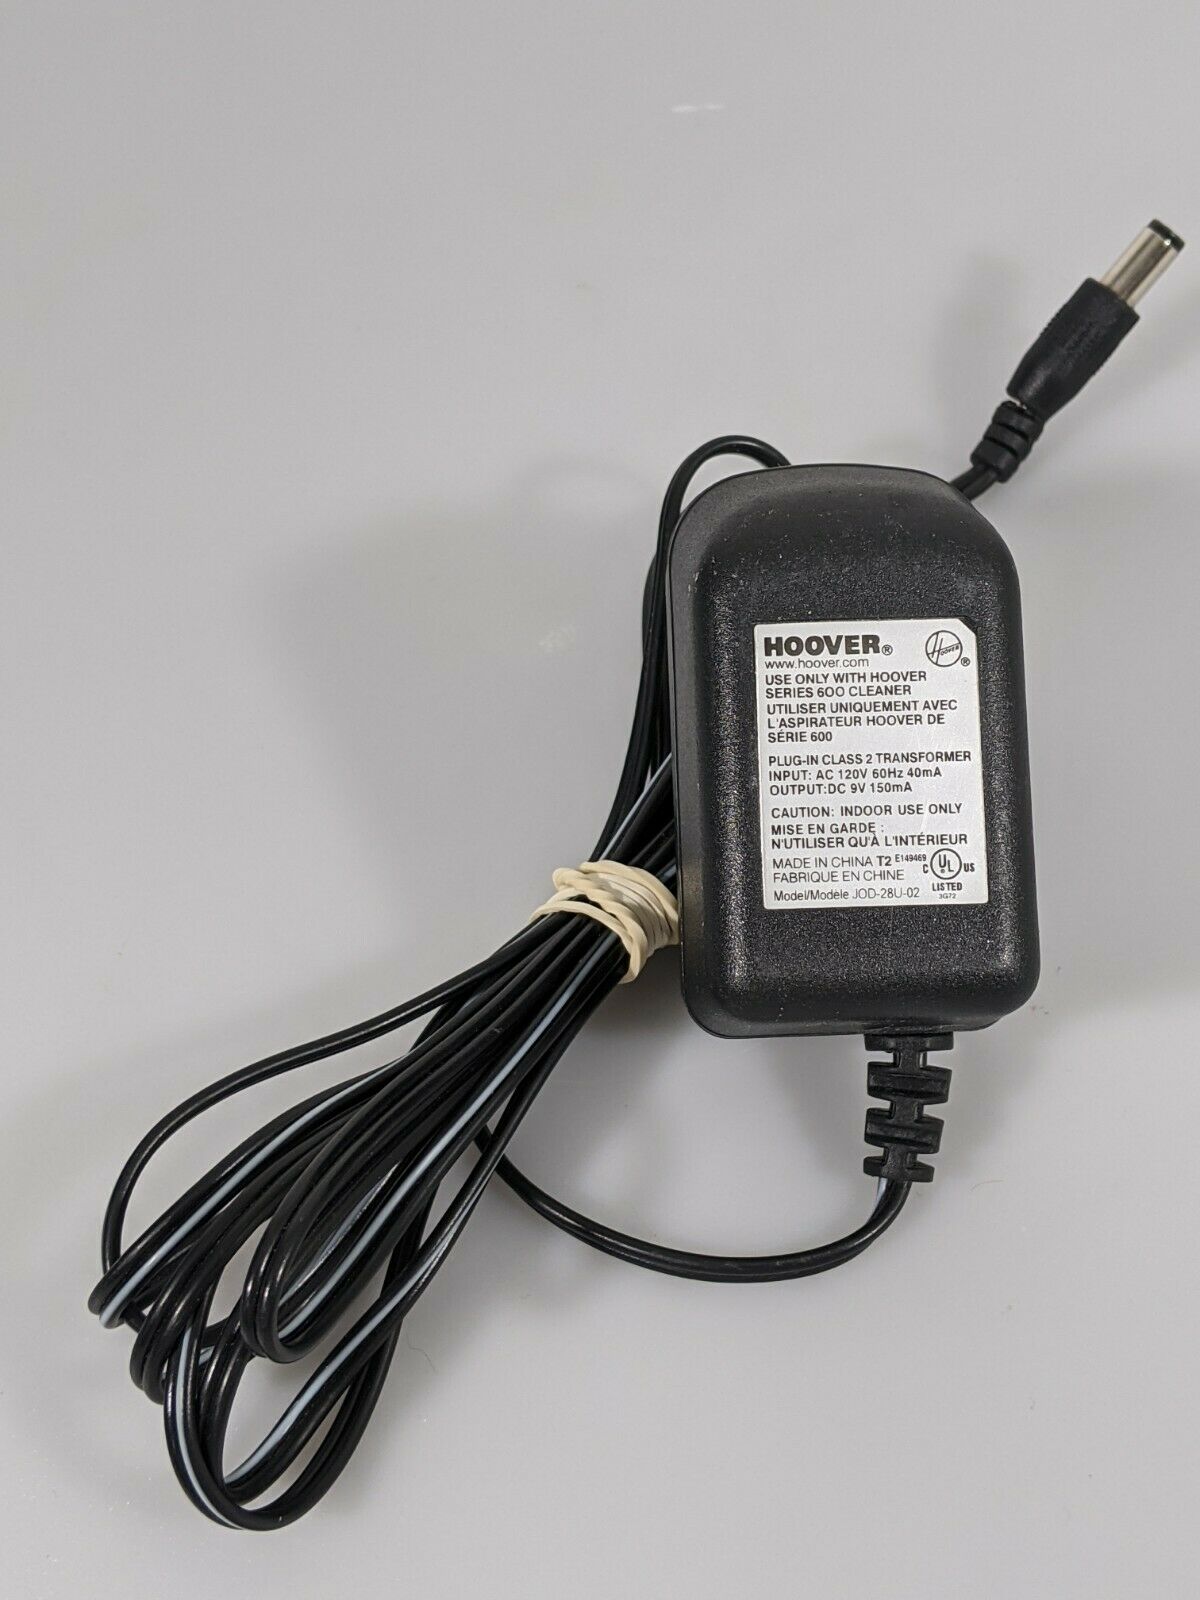 Authentic Hoover AC Adapter JOD-28U-02 For 600 Series Cleaners 9V 150mA Brand: Hoover Type: AC/DC Adapter Output Vol - Click Image to Close